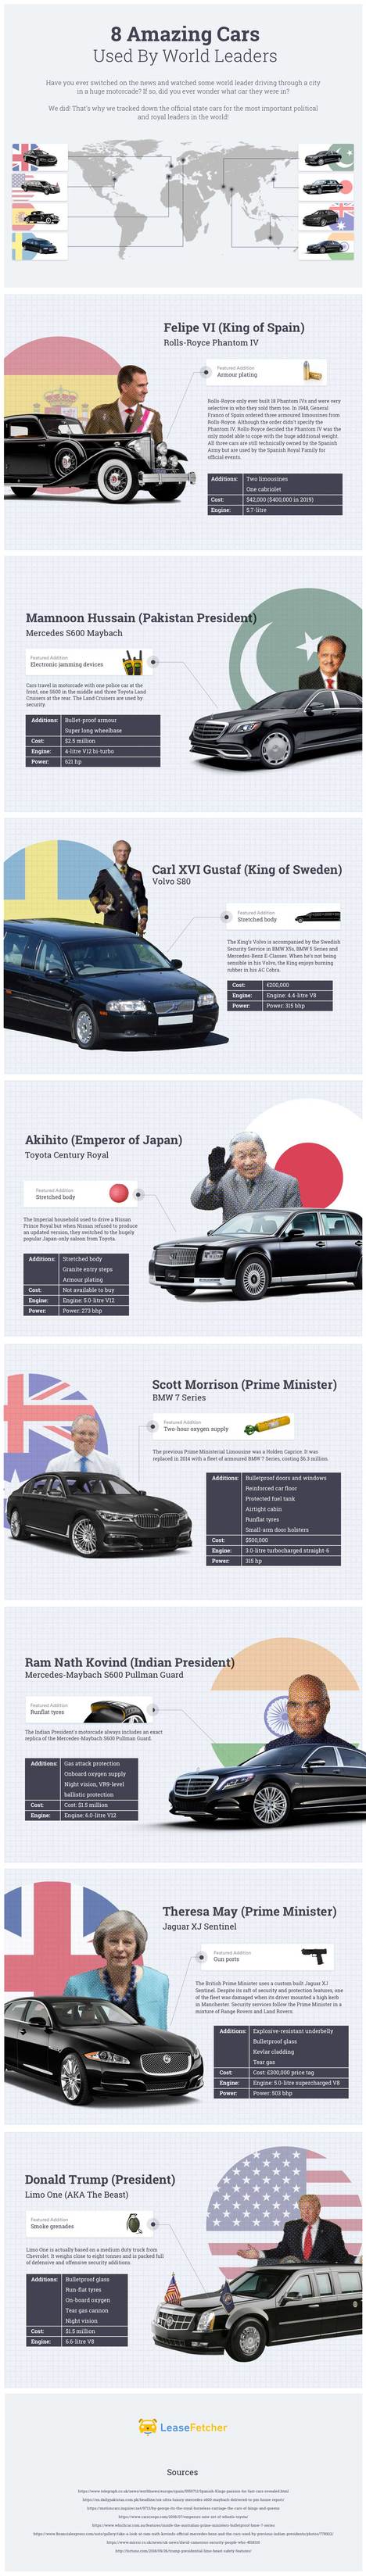 8 Amazing Cars Used by World Leaders